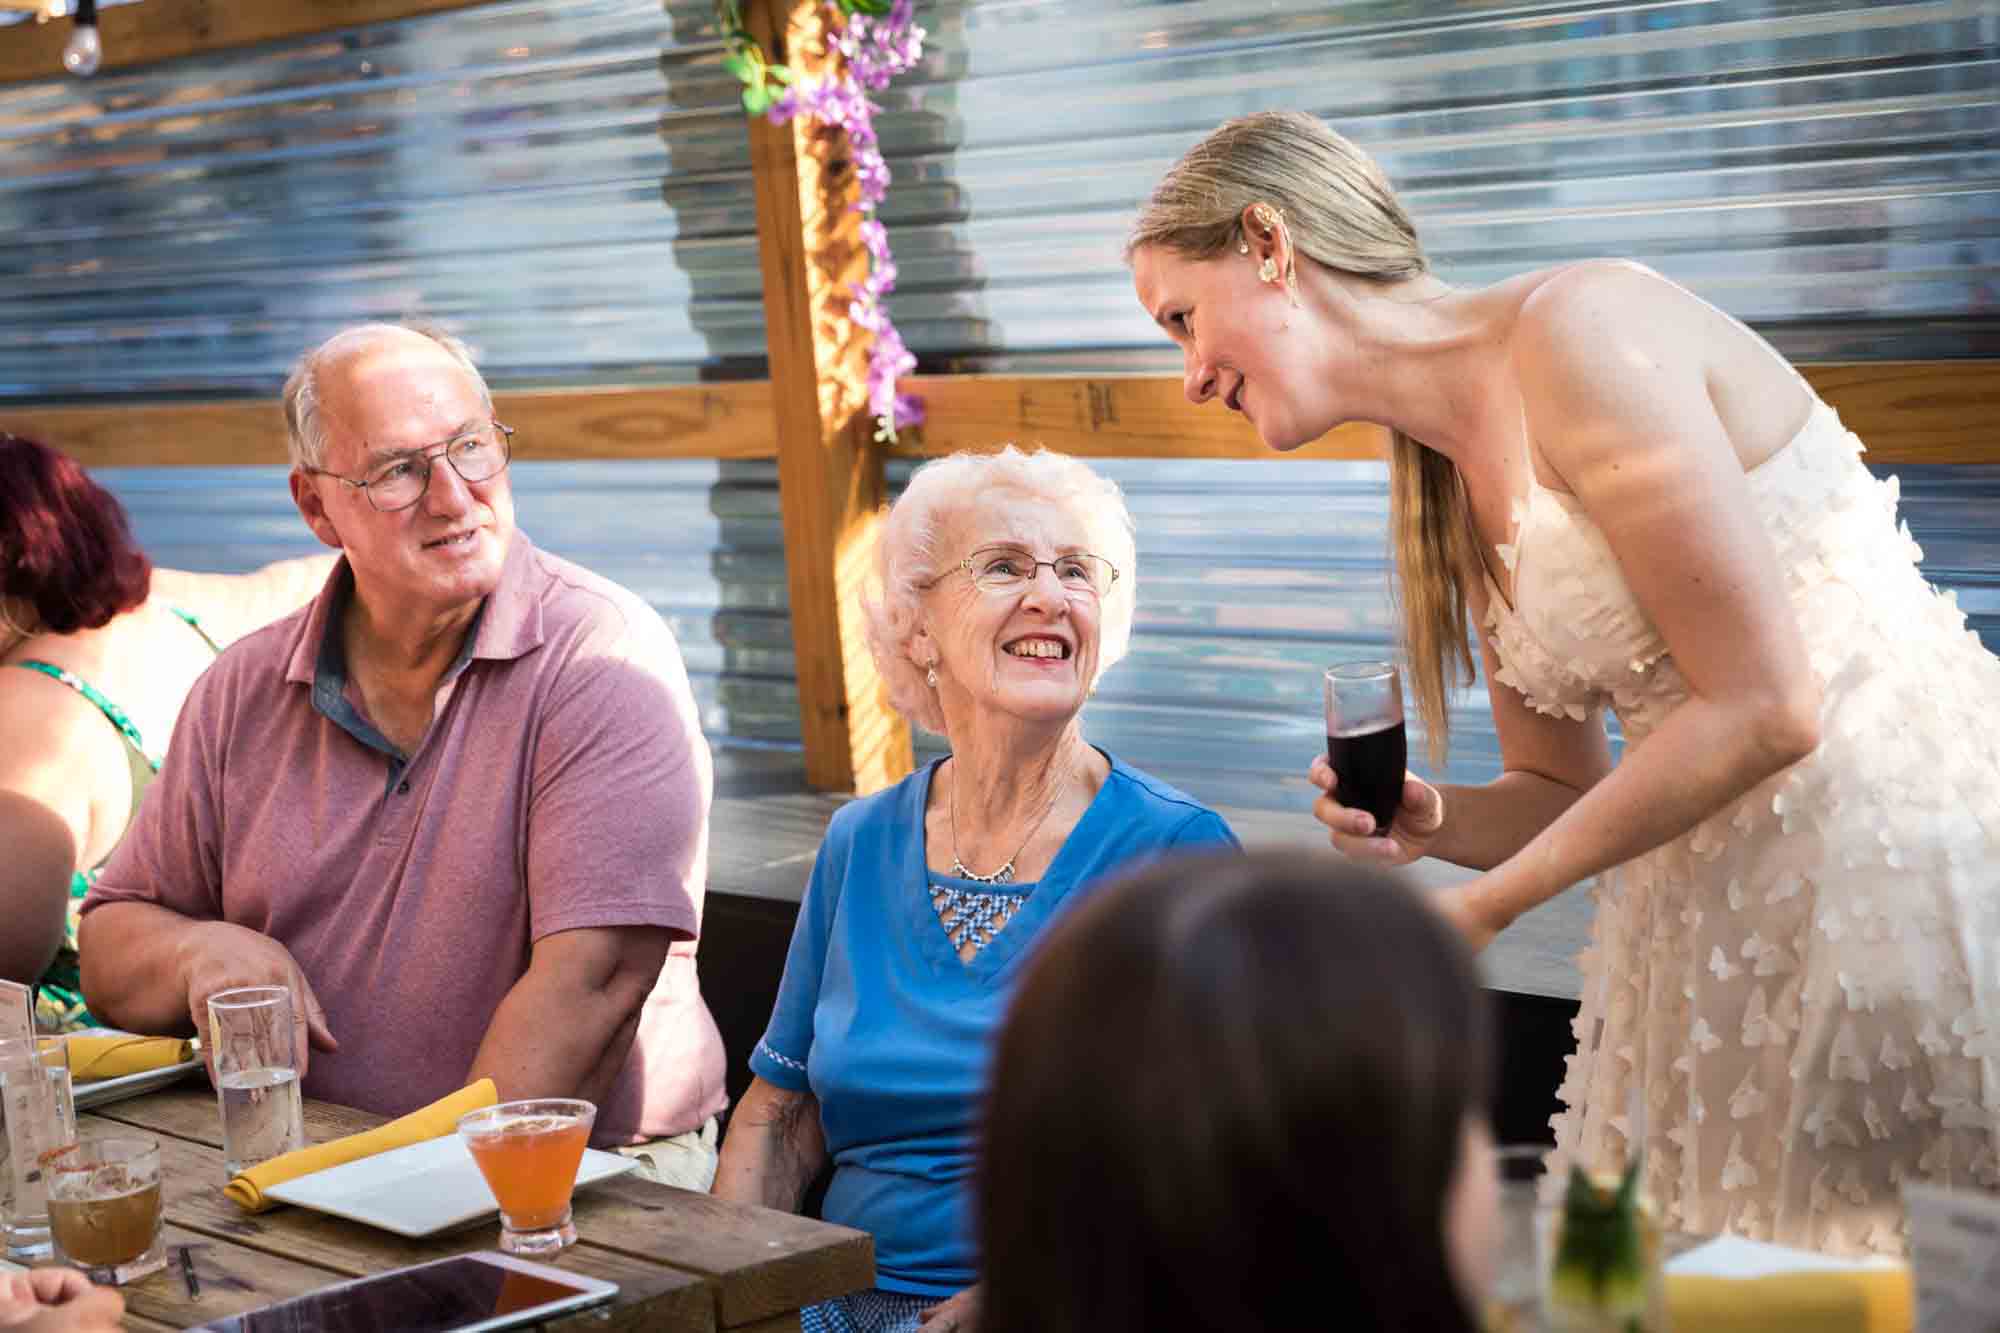 Bride speaking to seated grandmother and father during rehearsal dinner at an outdoor restaurant